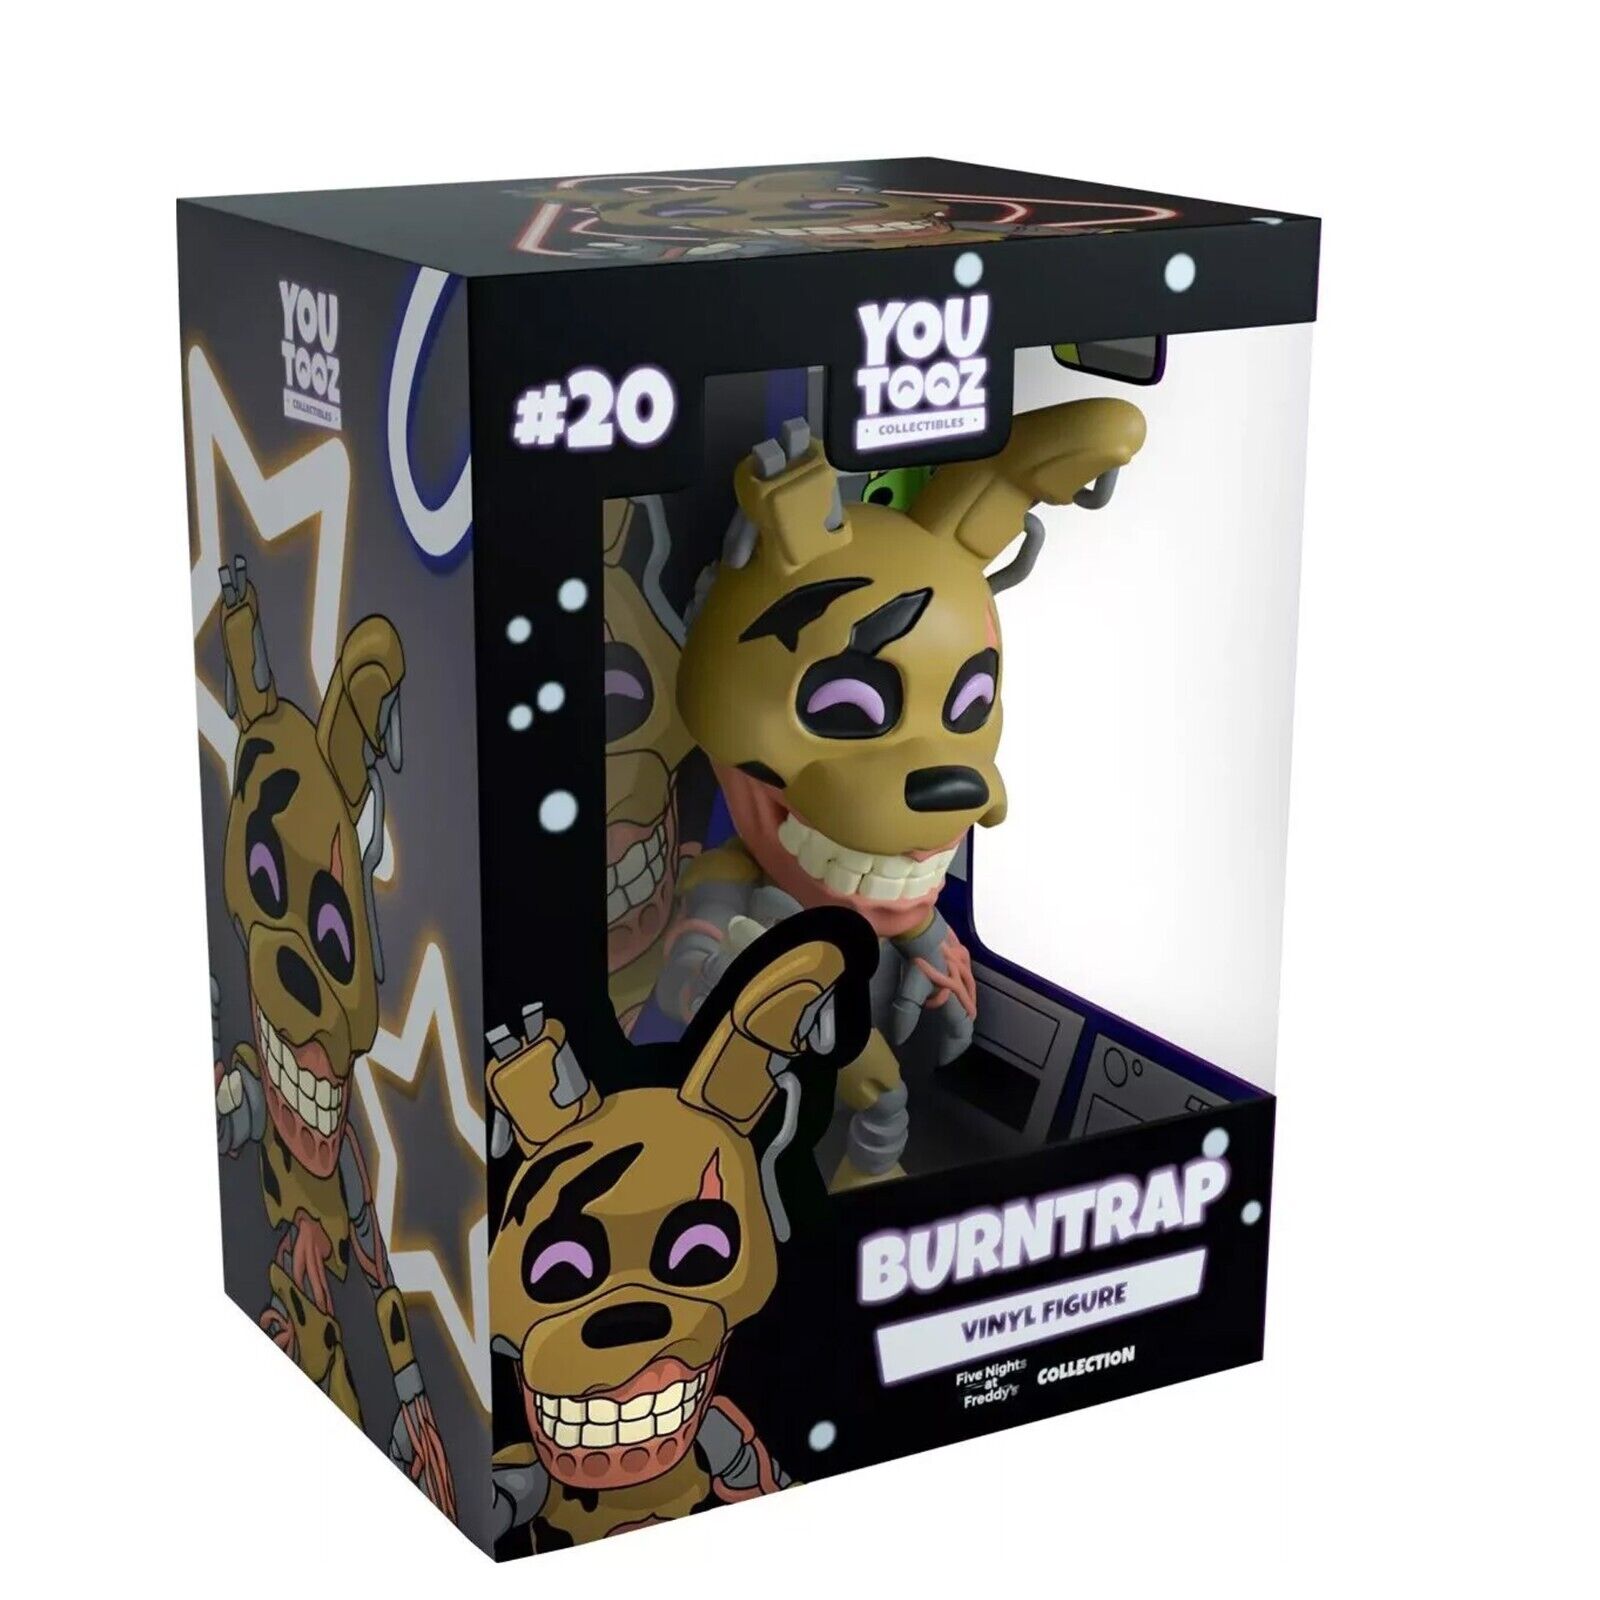 Youtooz: Burntrap Vinyl Figure -Five Nights at Freddy's Collection #20